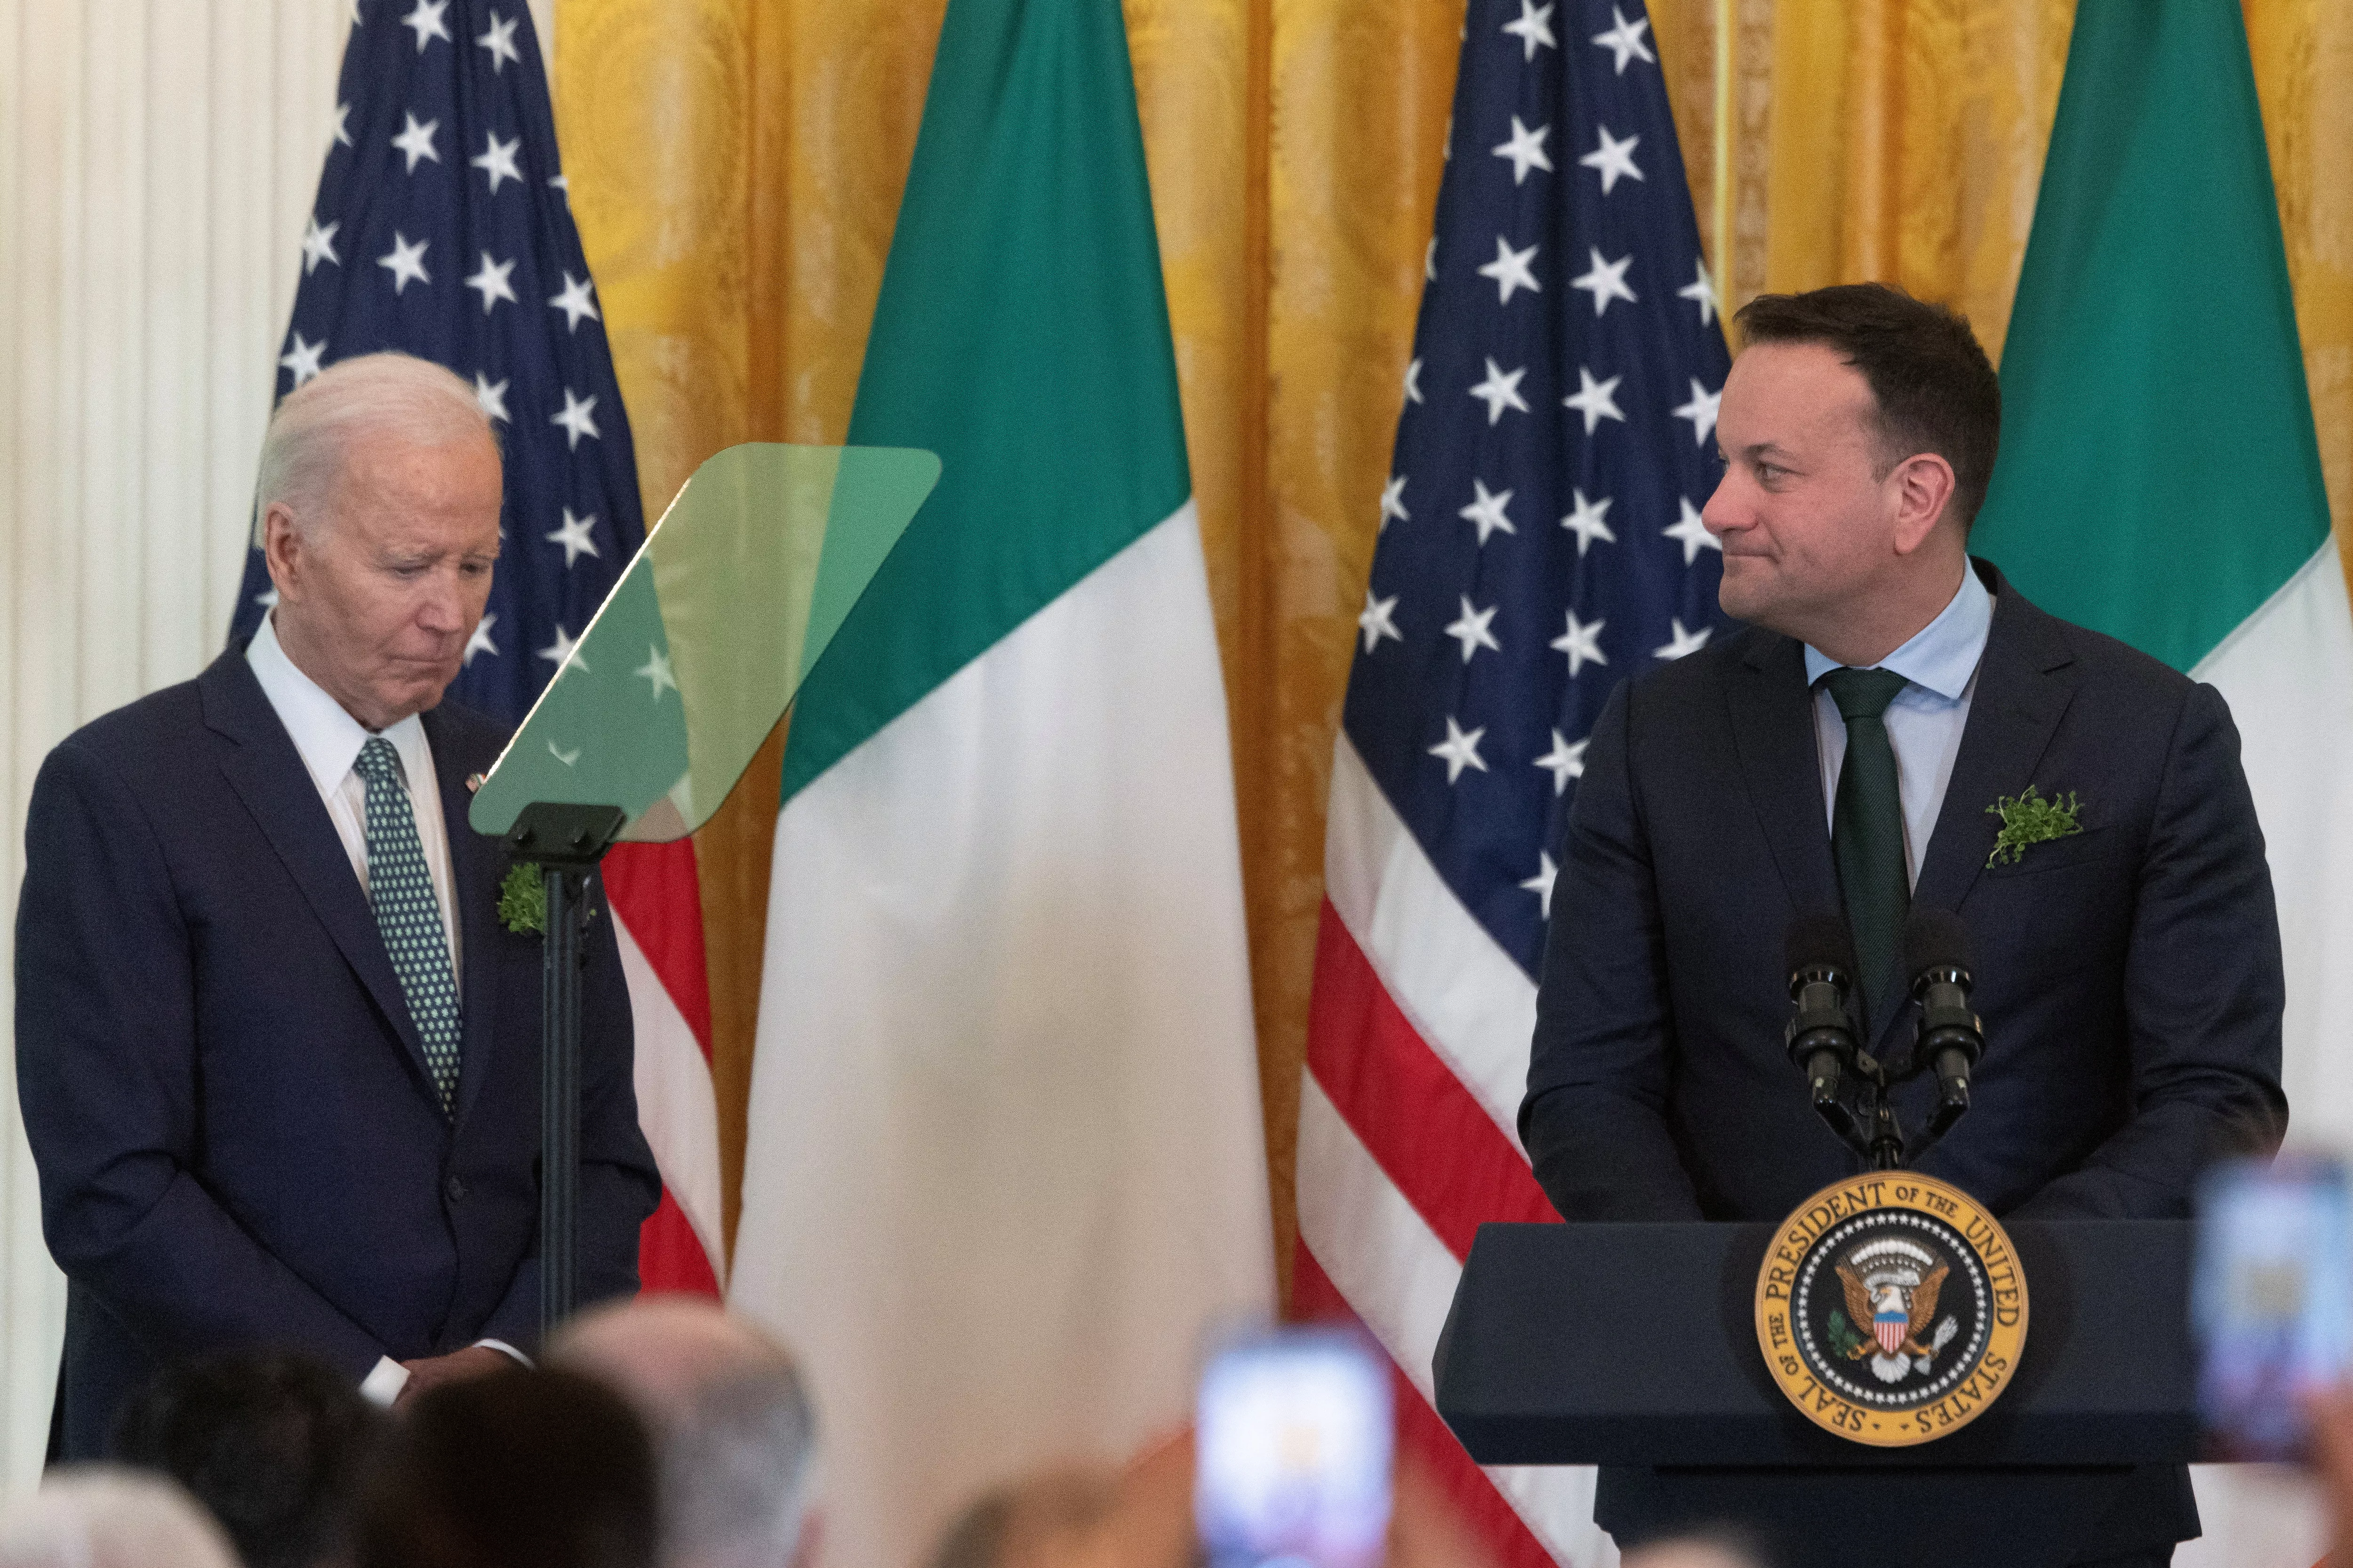 president-biden-participates-in-a-st-patricks-day-event-at-the-white-house